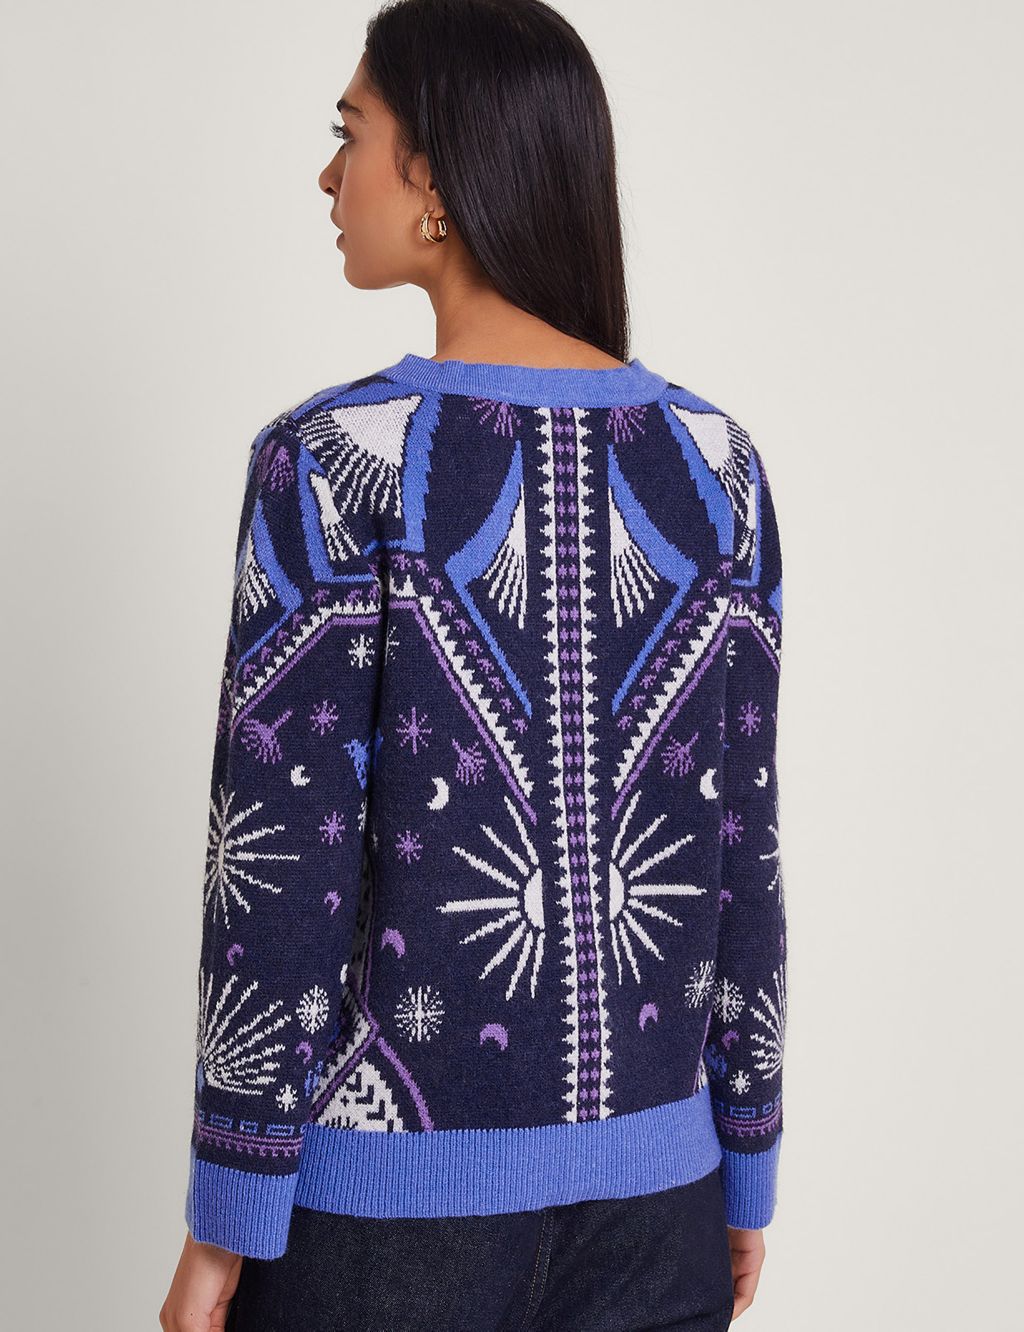 Sun and Moon Patterned Crew Neck Cardigan image 3